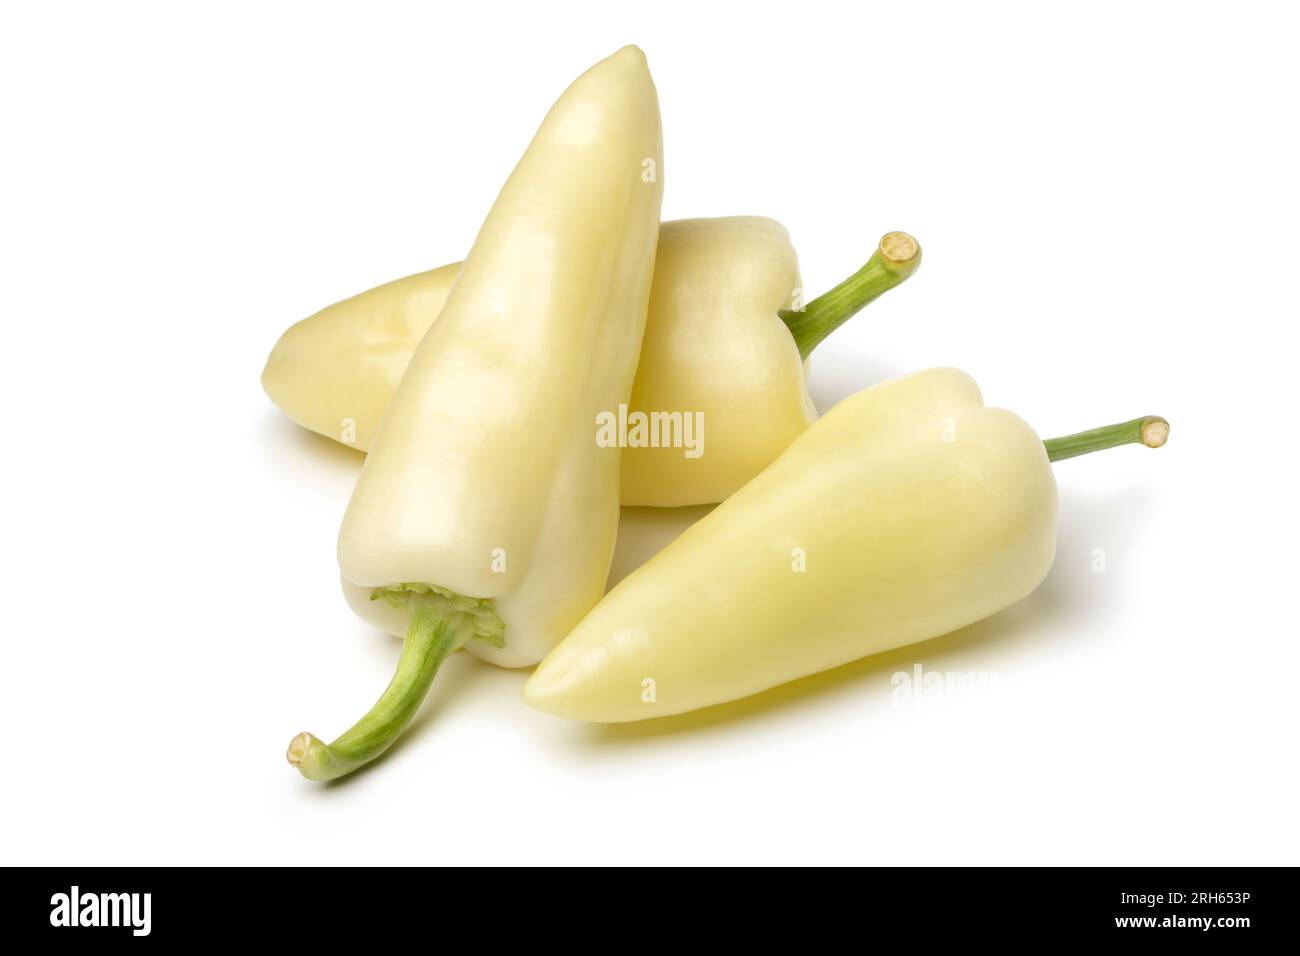 Heap of whole fresh raw white pointed bell peppers isolated on white background close up Stock Photo